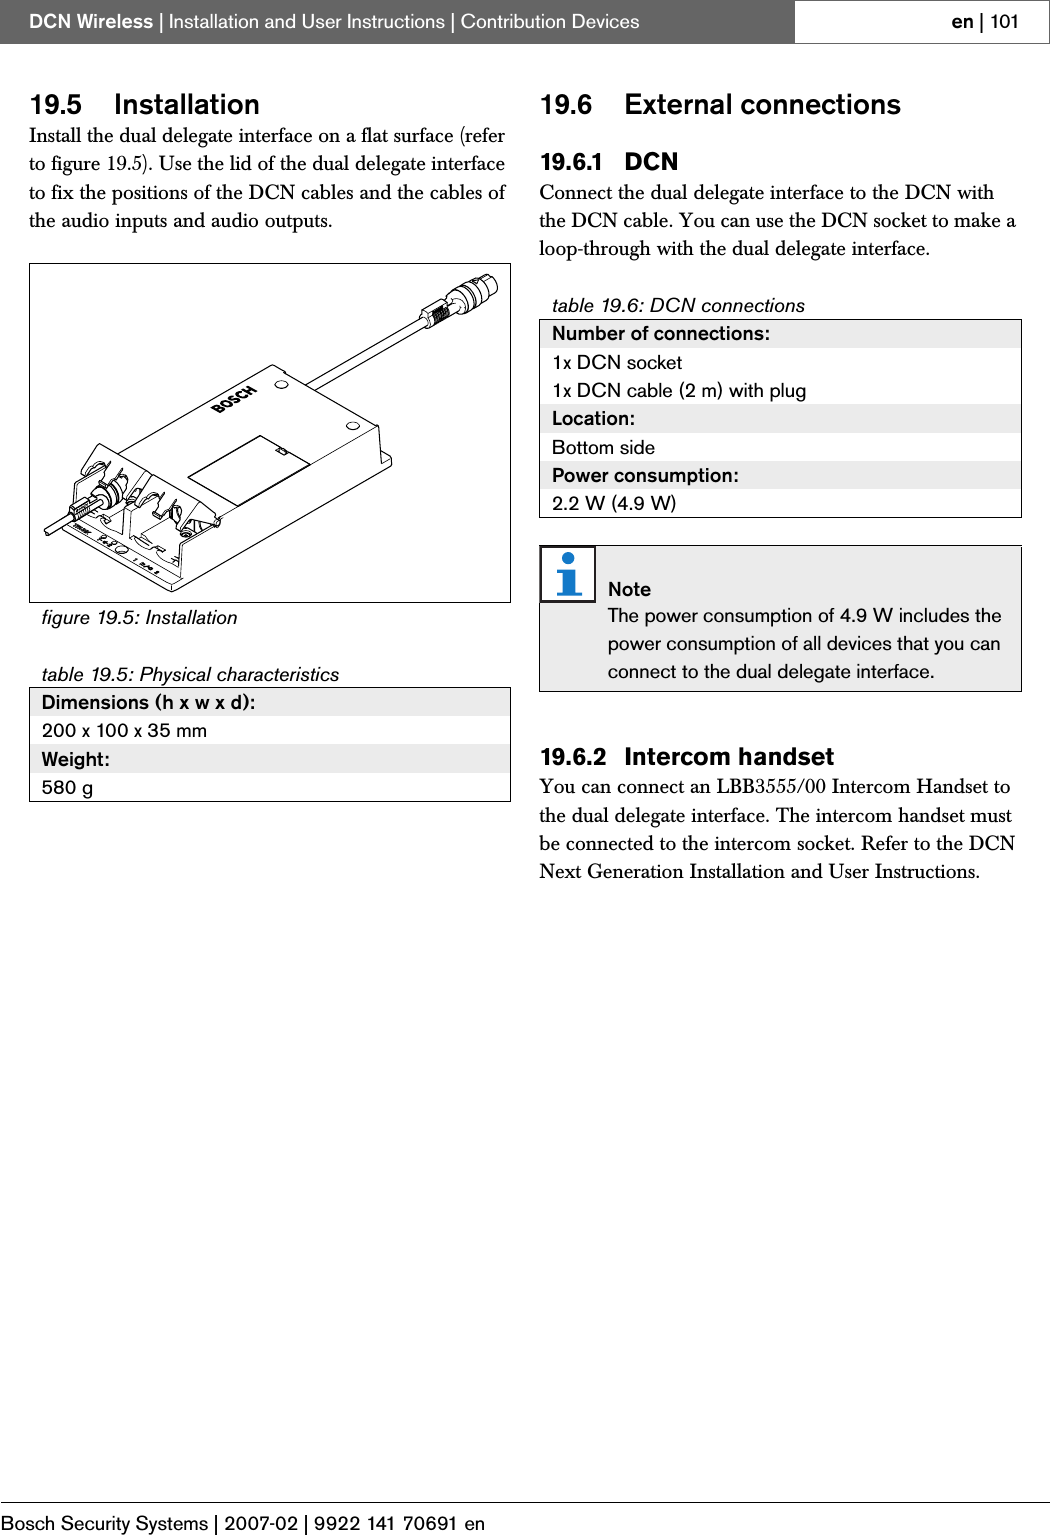 Page 72 of Bosch Security Systems DCNWAP Wireless Access Point User Manual Part 2